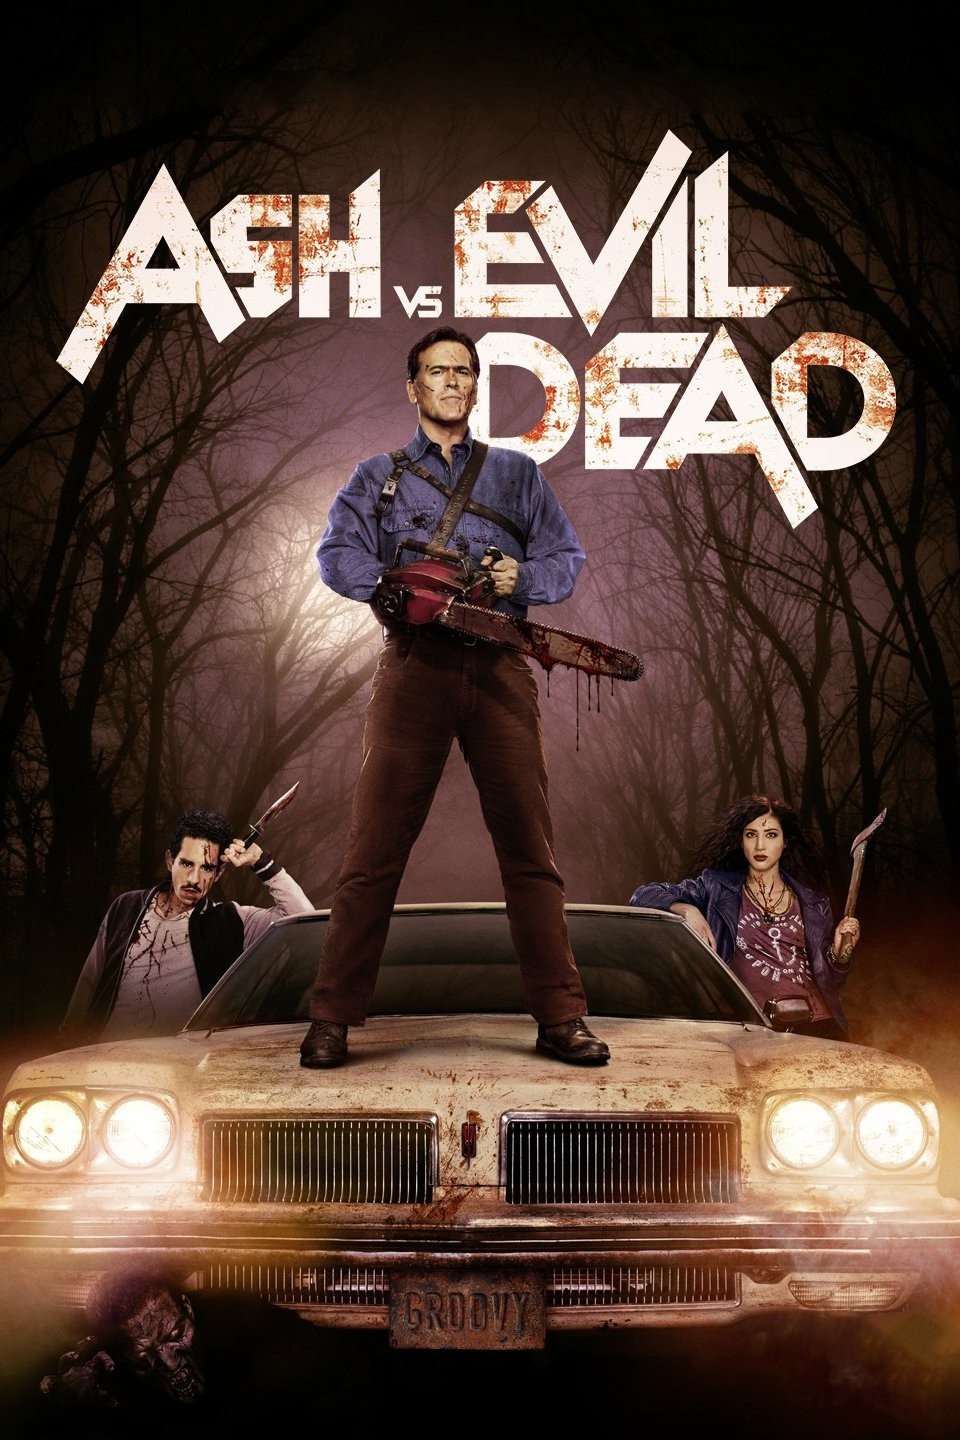 So What's Going On With Ash vs Evil Dead Season 3? - Bloody Disgusting